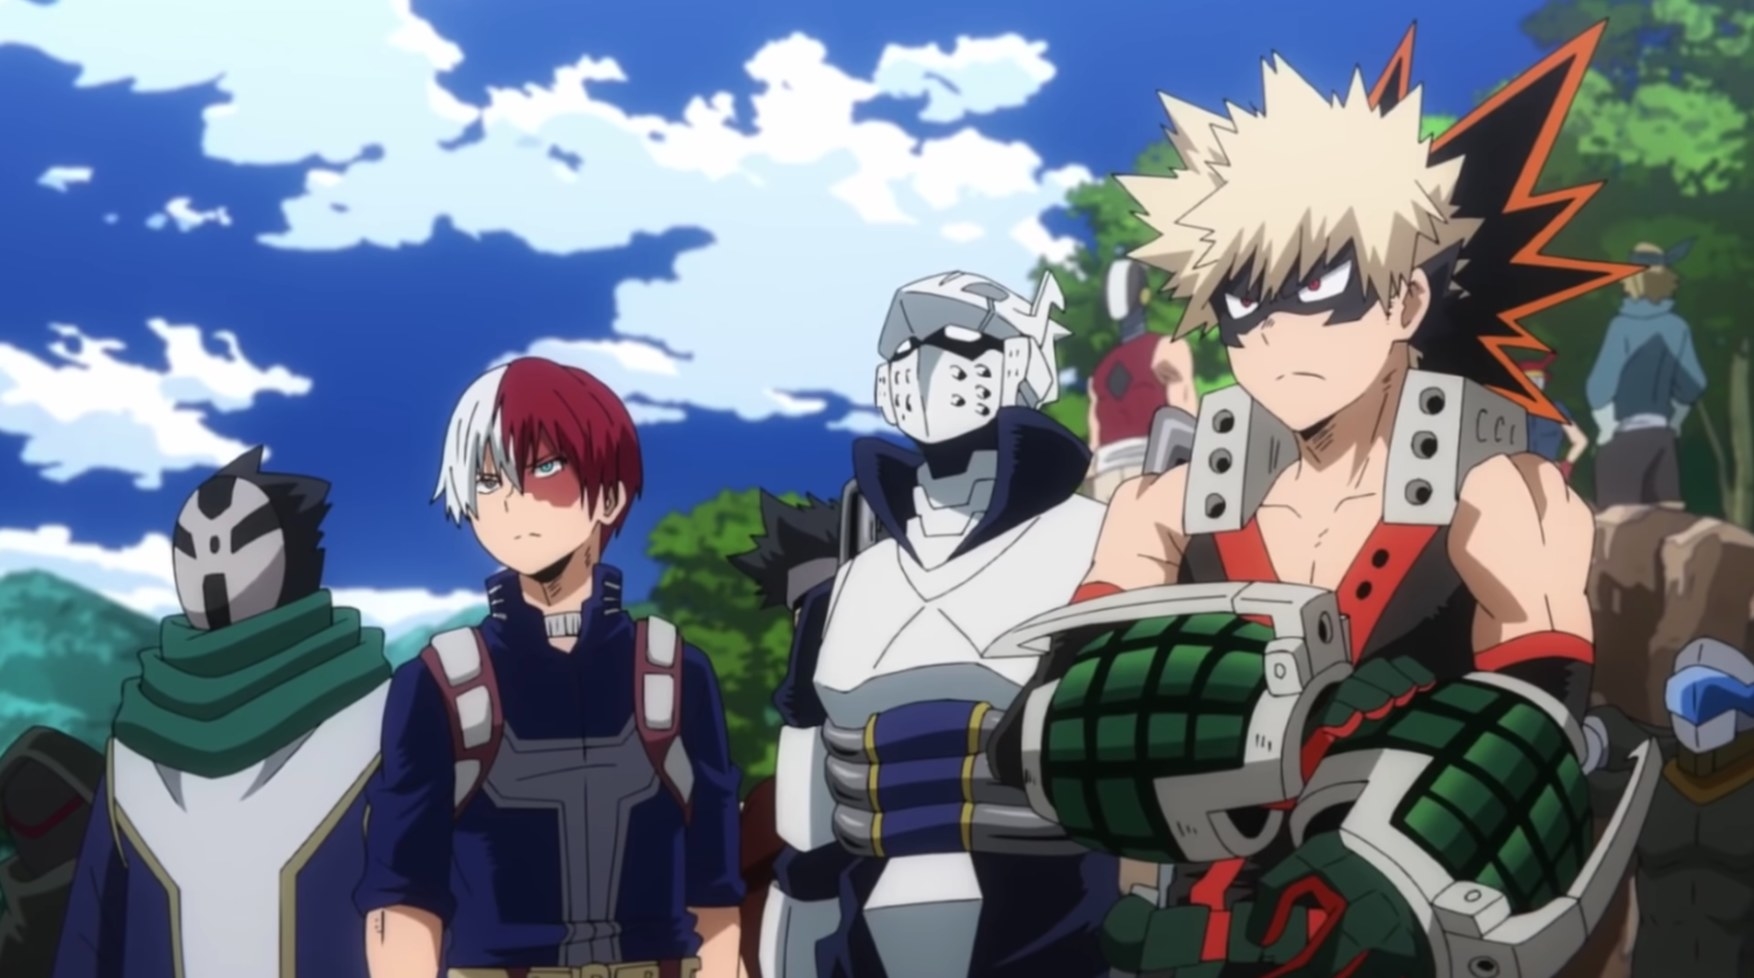 Class 1-A students in the My Hero Academia trailer